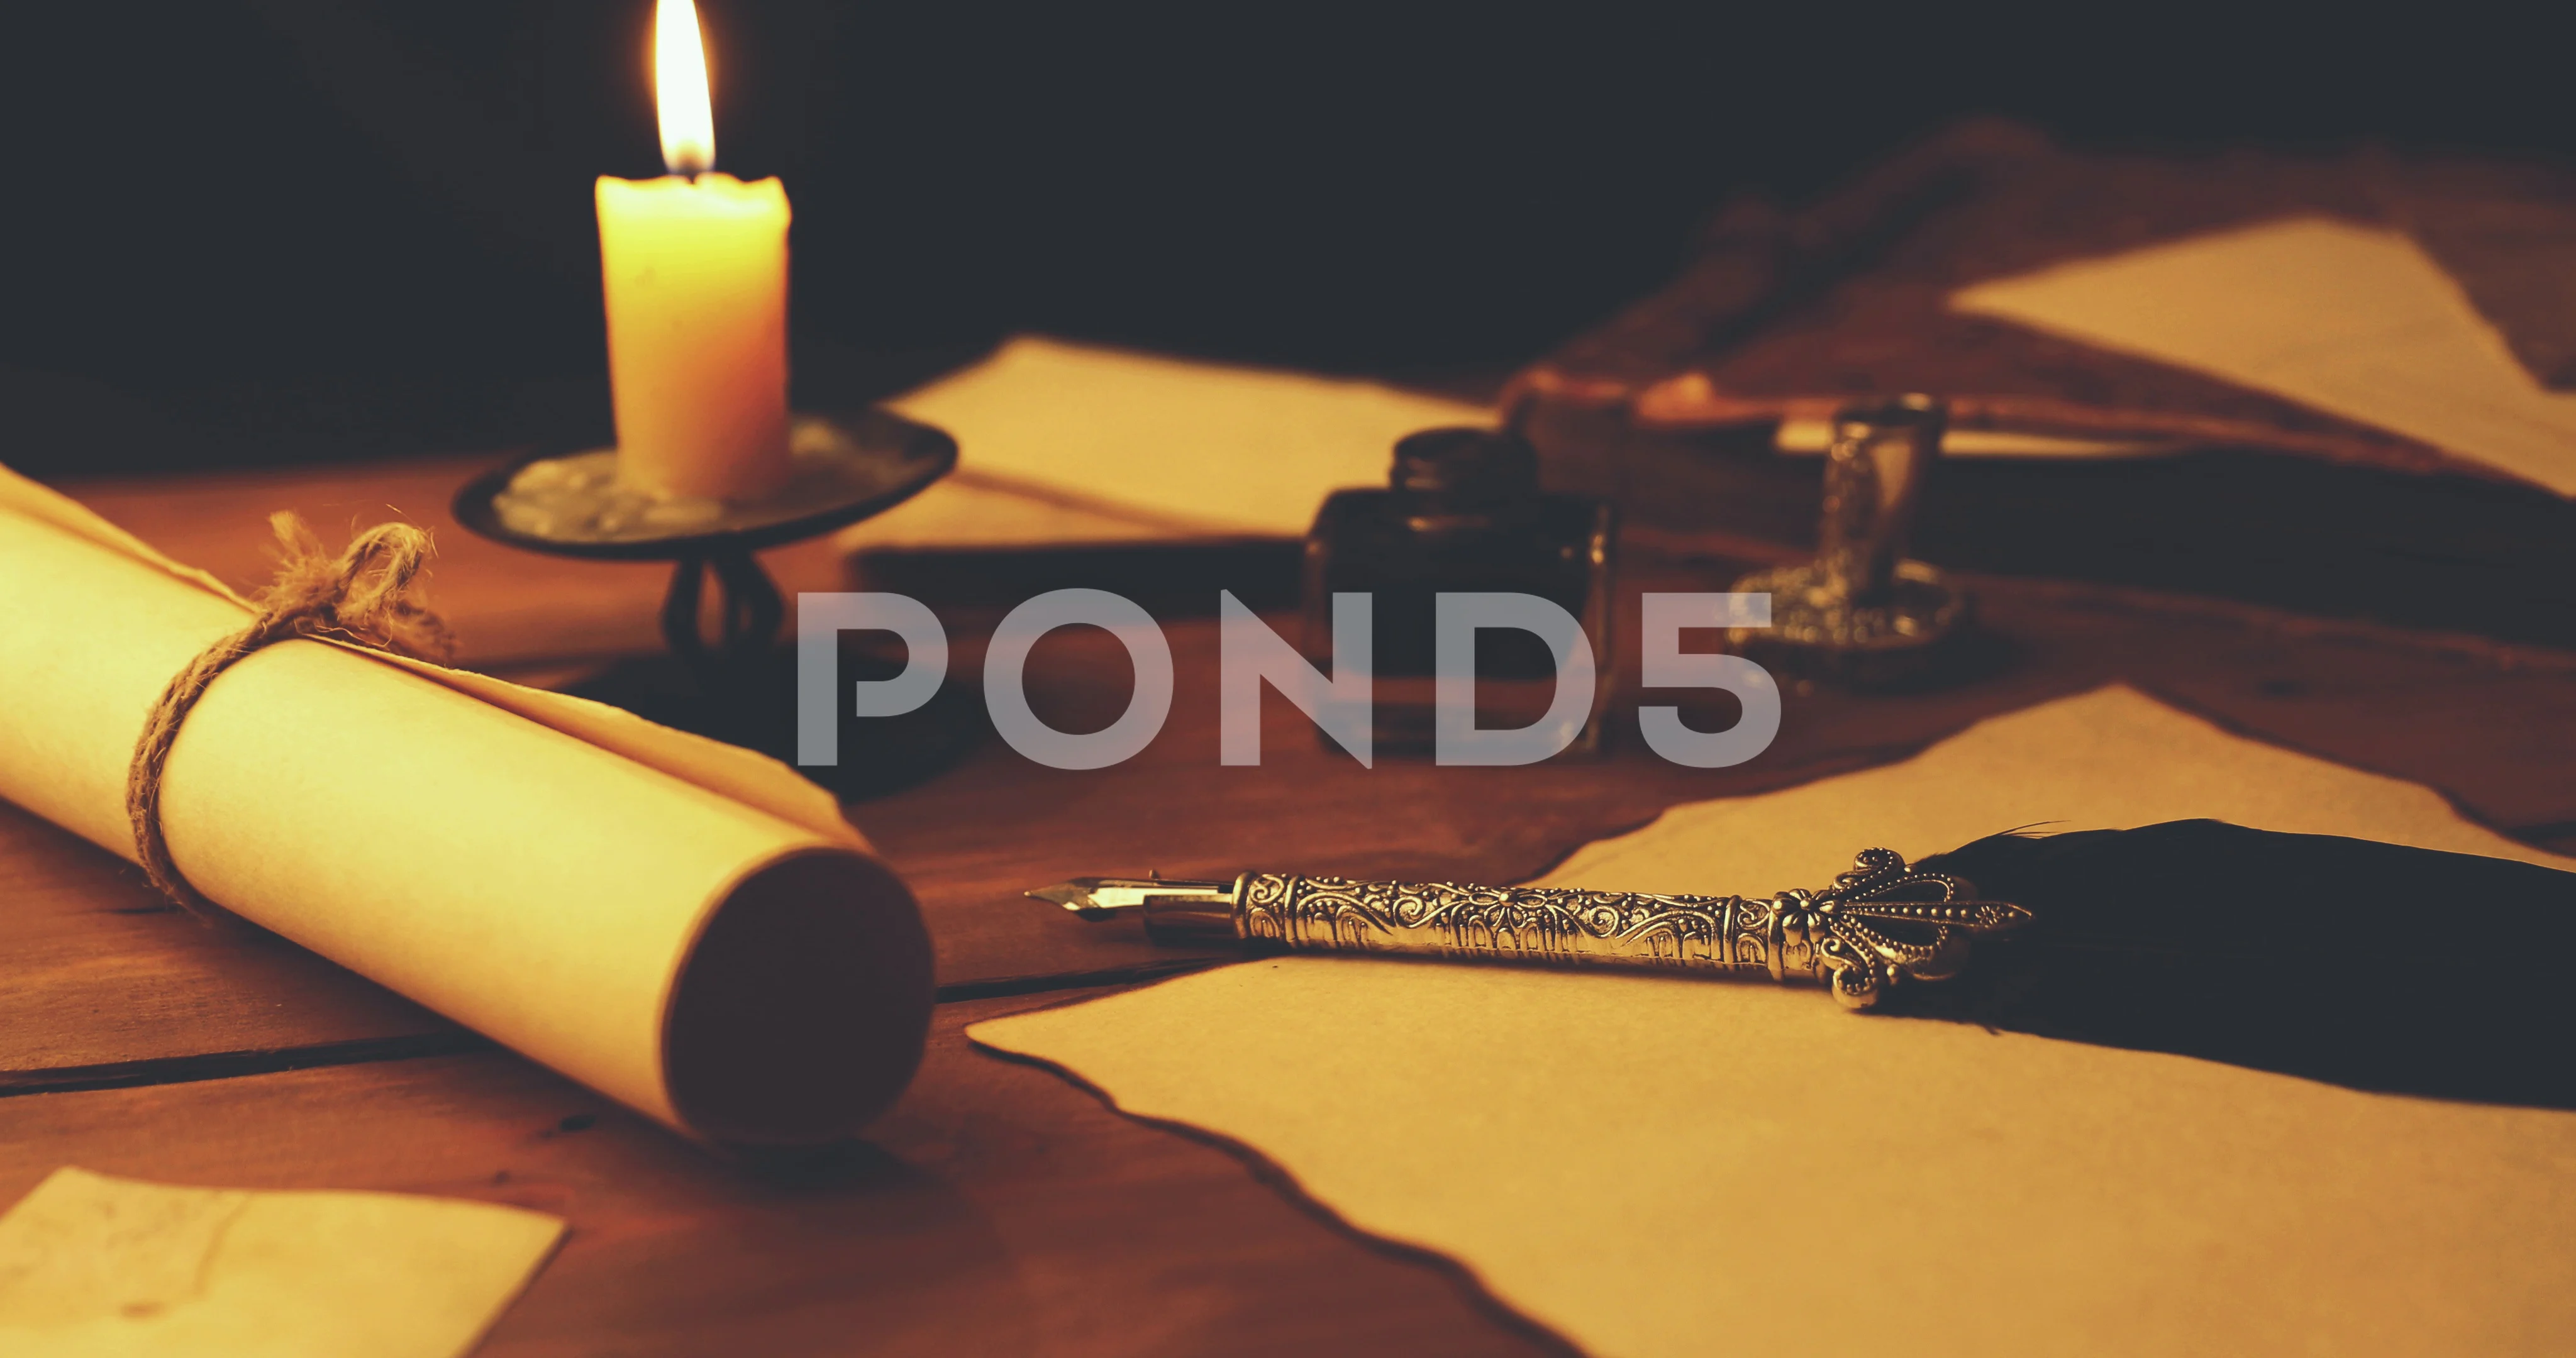 Old parchment paper and writing quill Stock Video Footage by